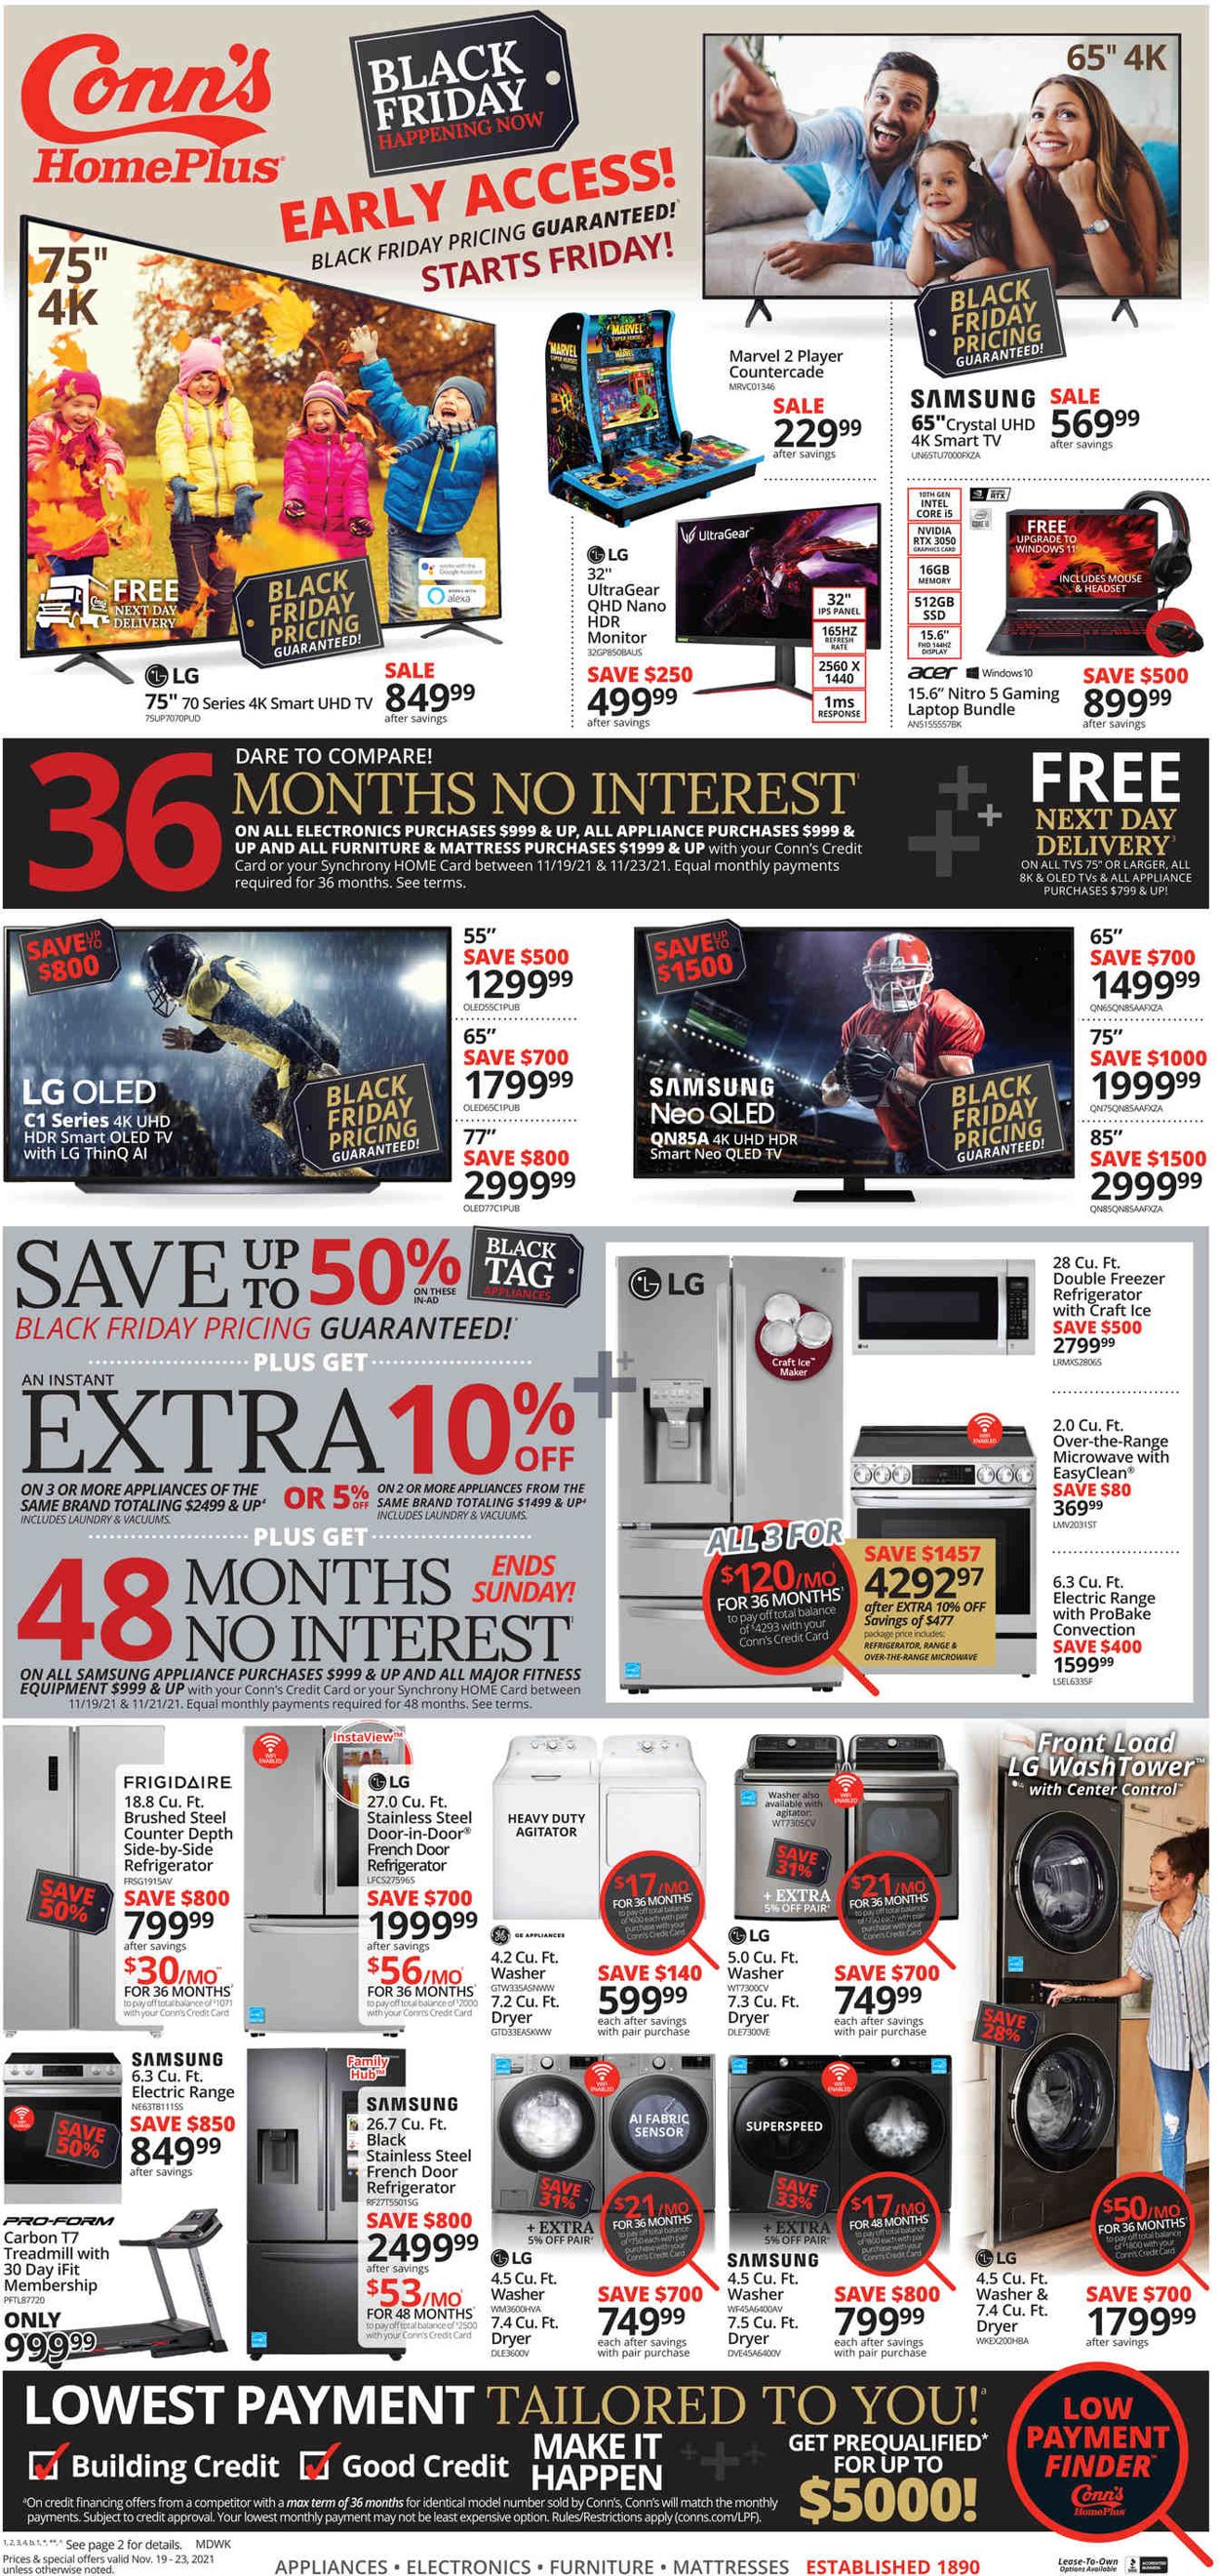 Conn's Home Plus BLACK FRIDAY 2021 Weekly Ad Circular - valid 11/19-11/23/2021